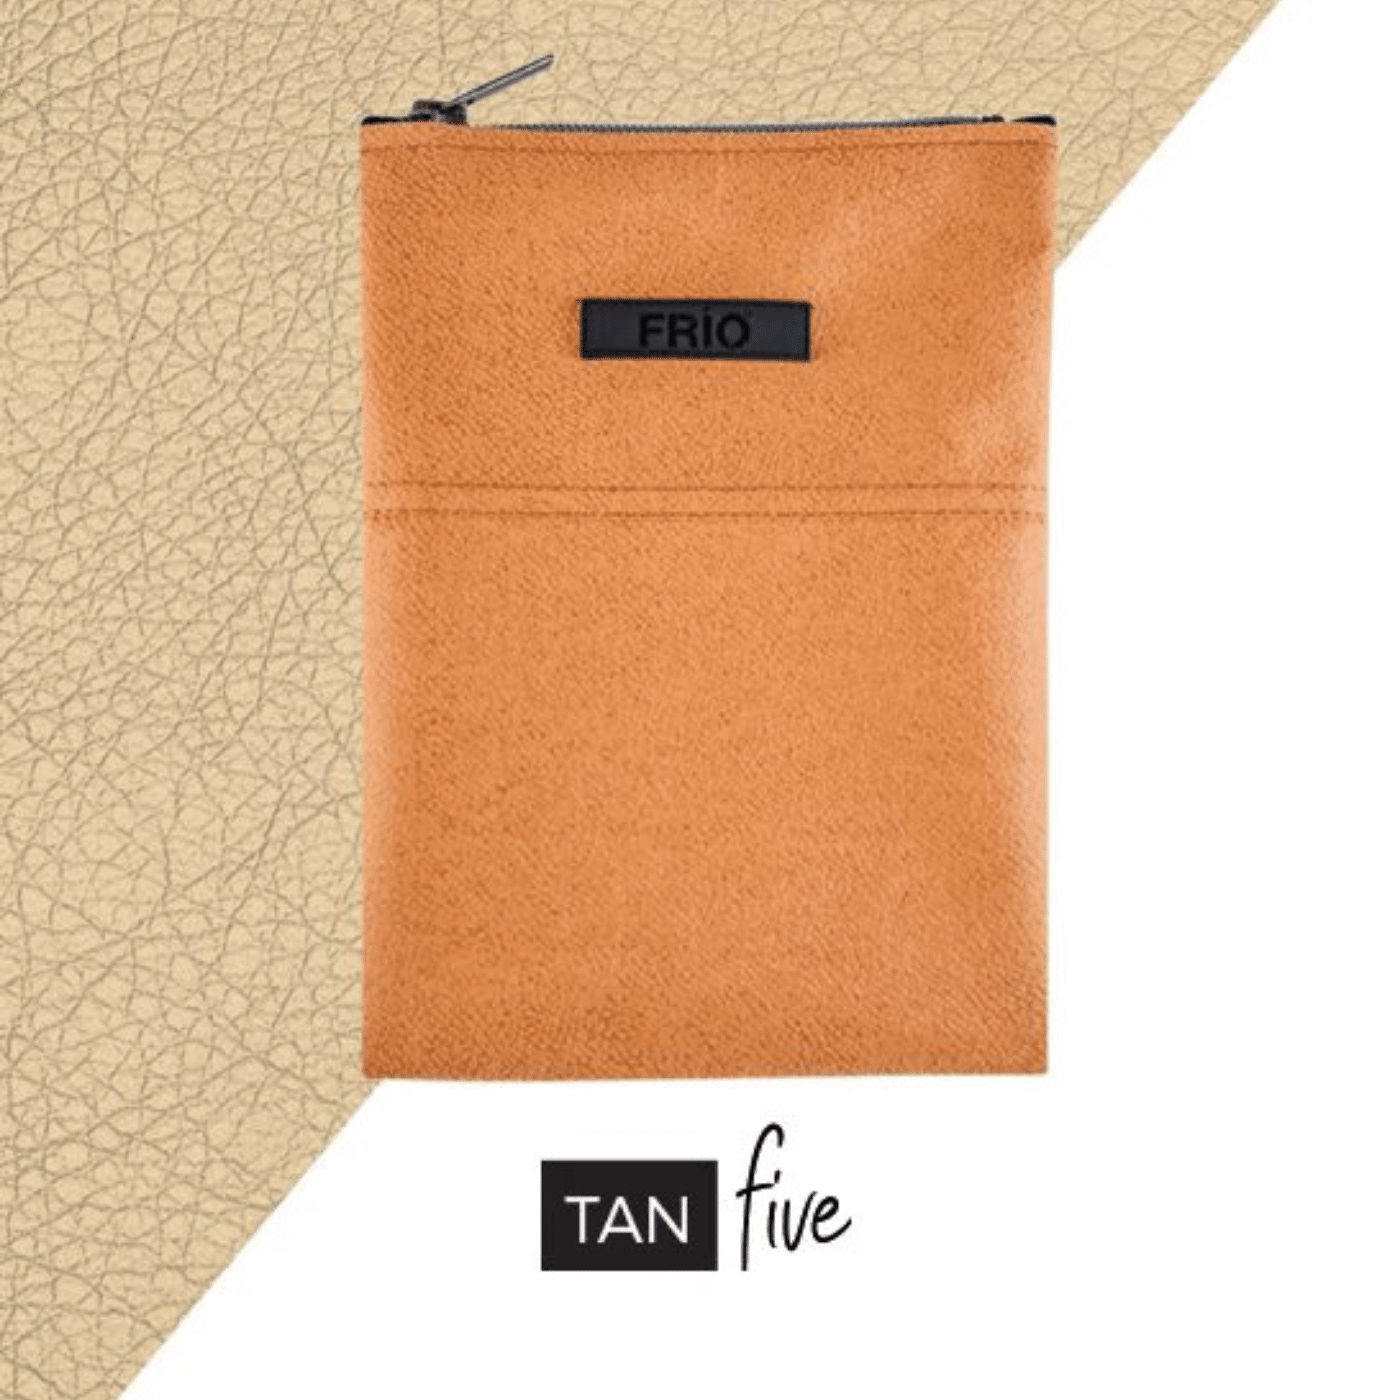 Frio Five Cooling Wallet Tan|Frio Five Cooling Wallet Tan|Frio Five Cooling Wallet Tan|Frio Five Cooling Wallet Tan|Frio Five Cooling Wallet Tan